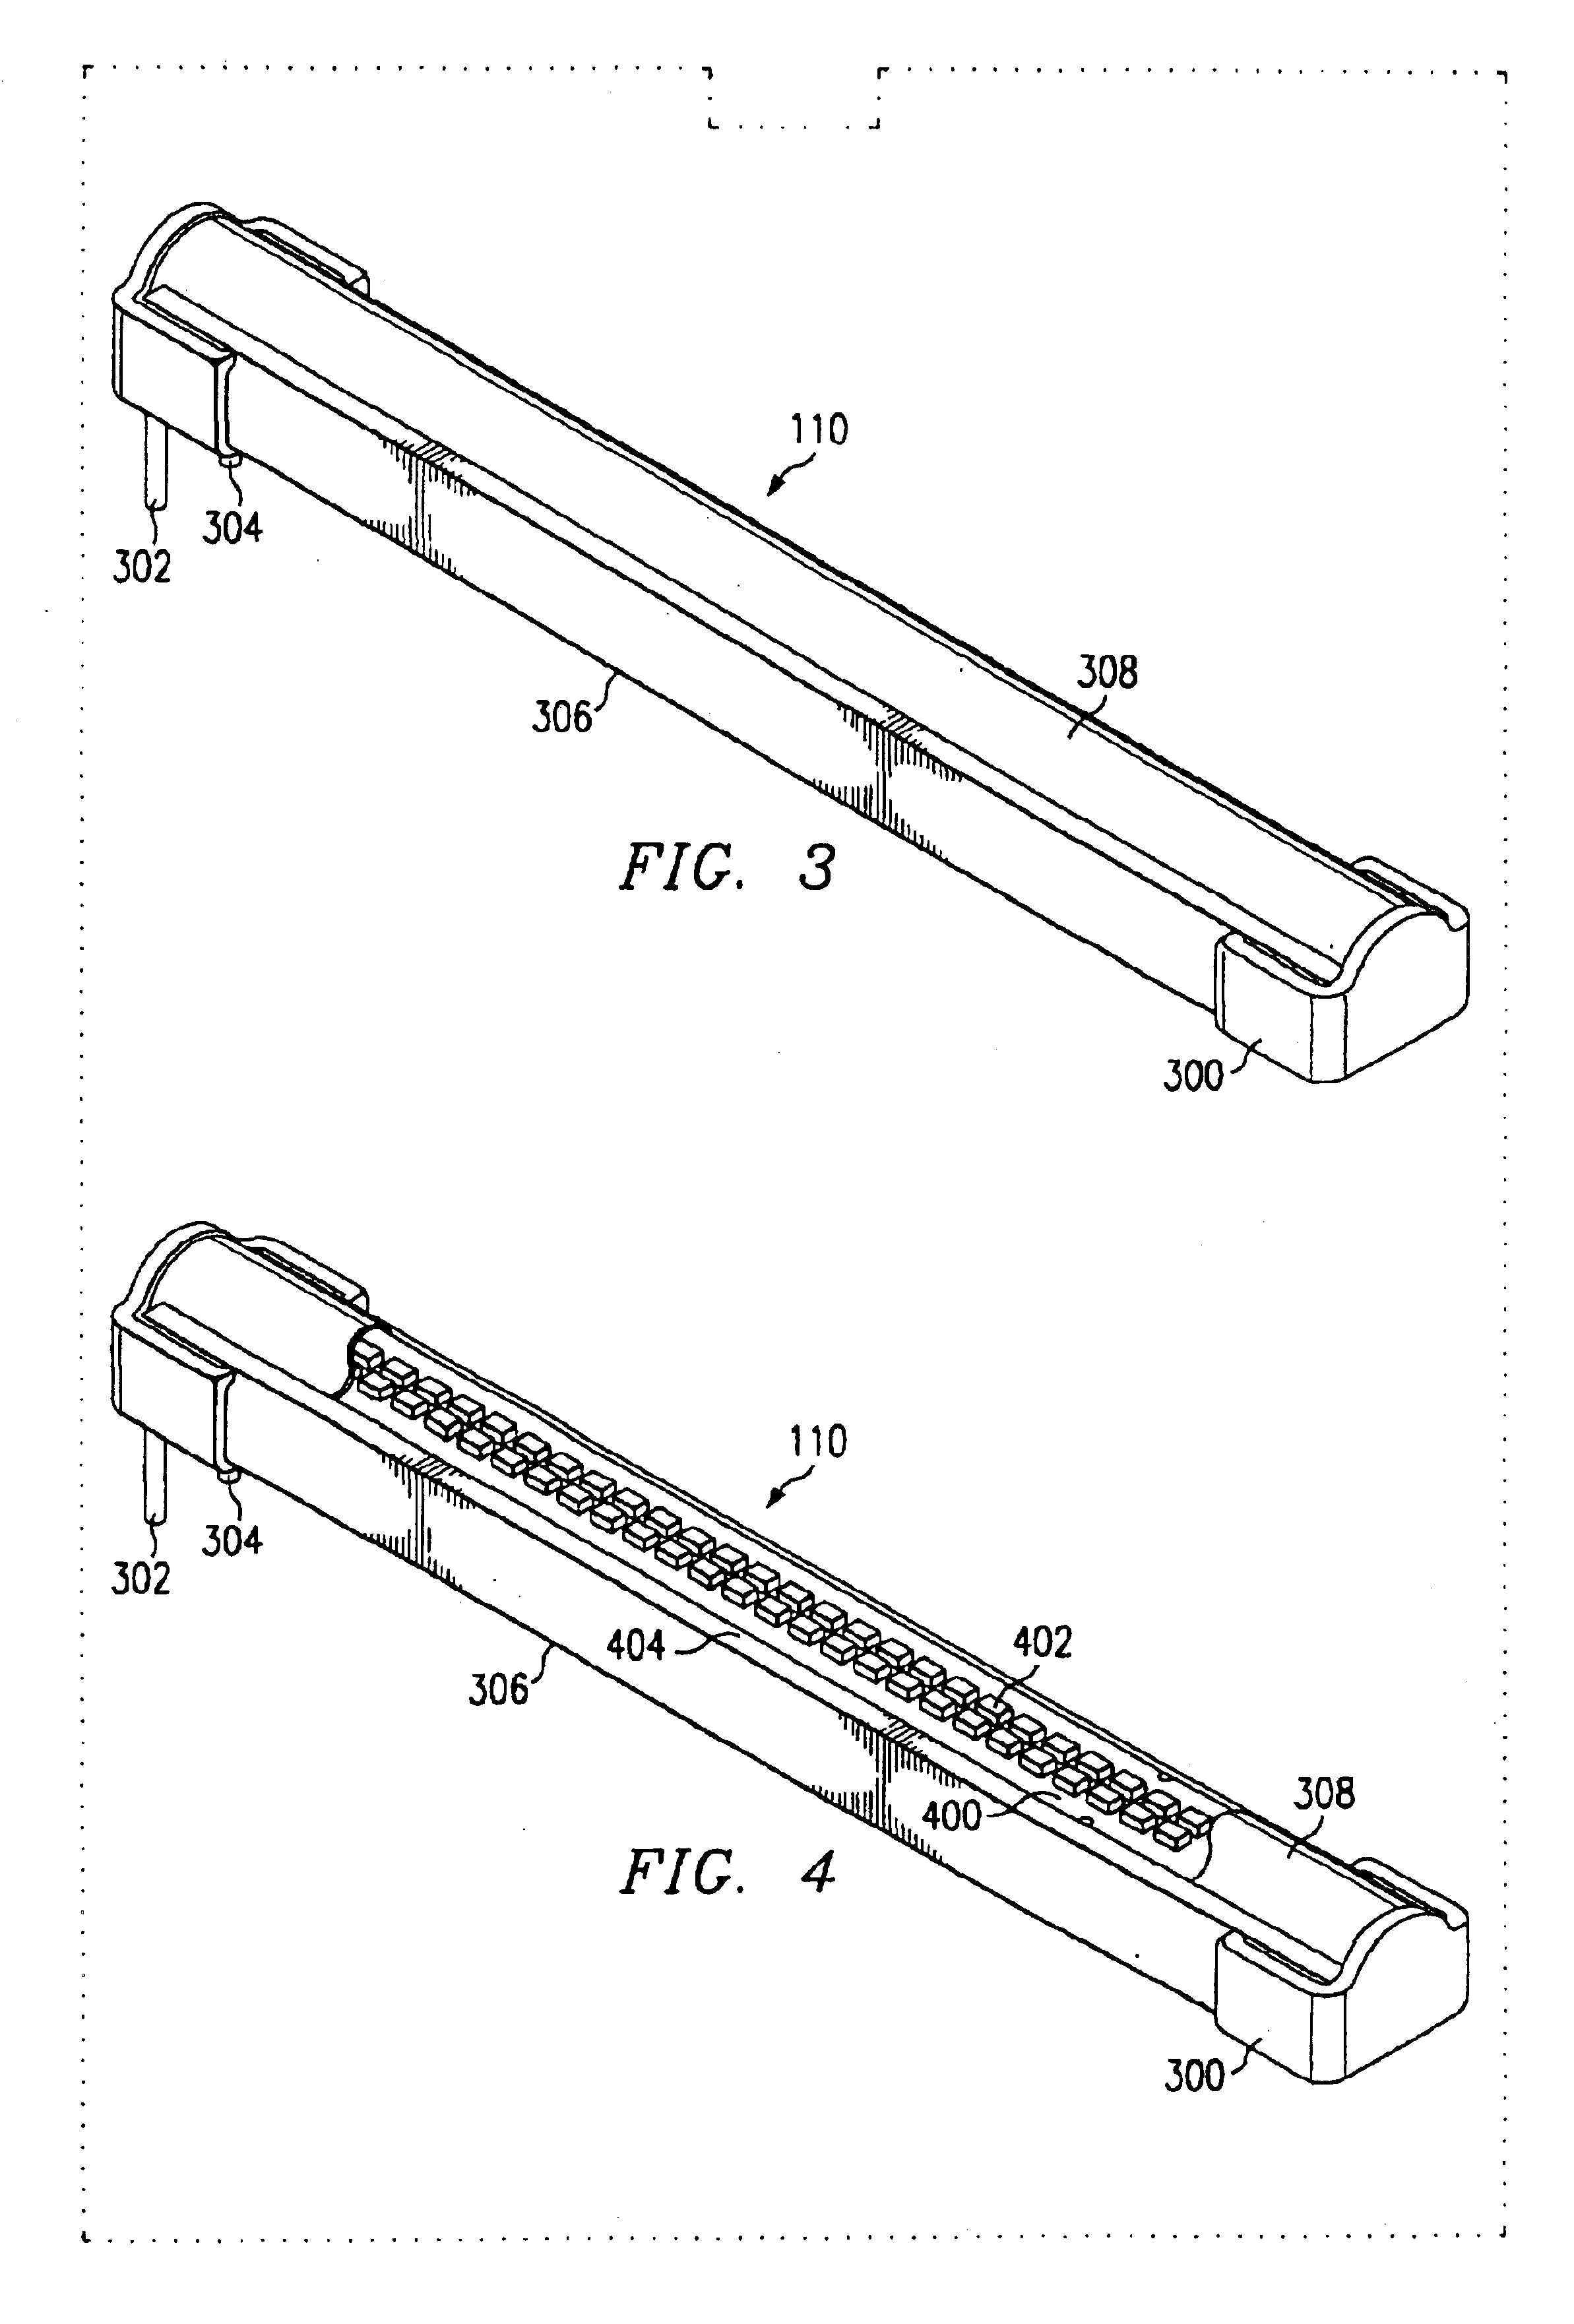 LED lighting device and system